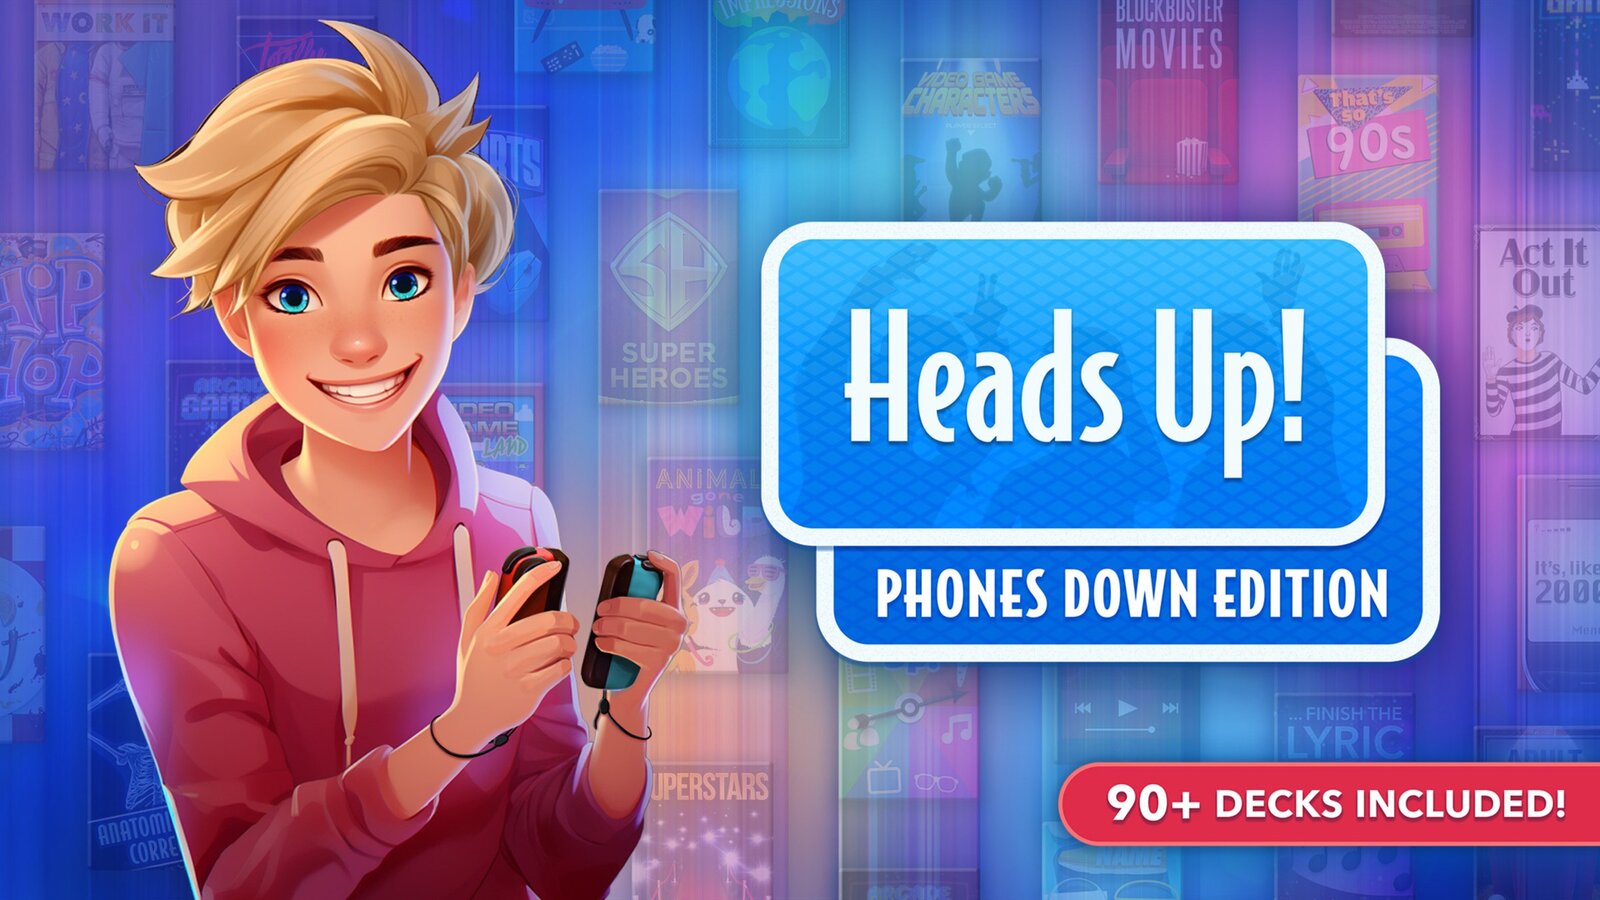 Heads Up! - Phones Down Edition